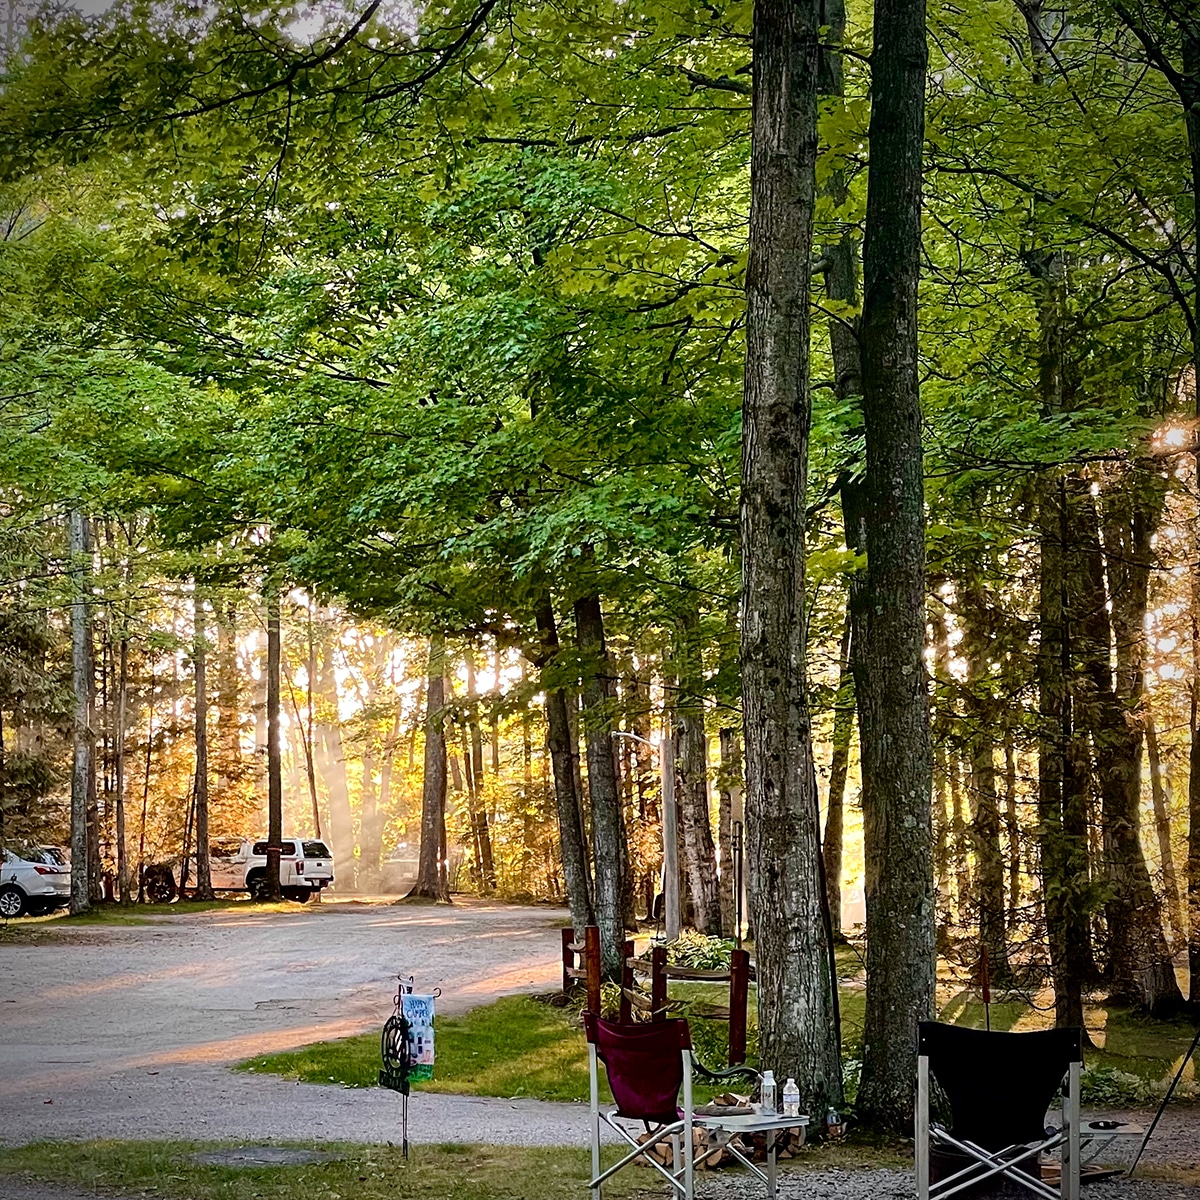 Looking out across the forested area of Hy-Land Court RV Park in Ellison Bay, Wisconsin.